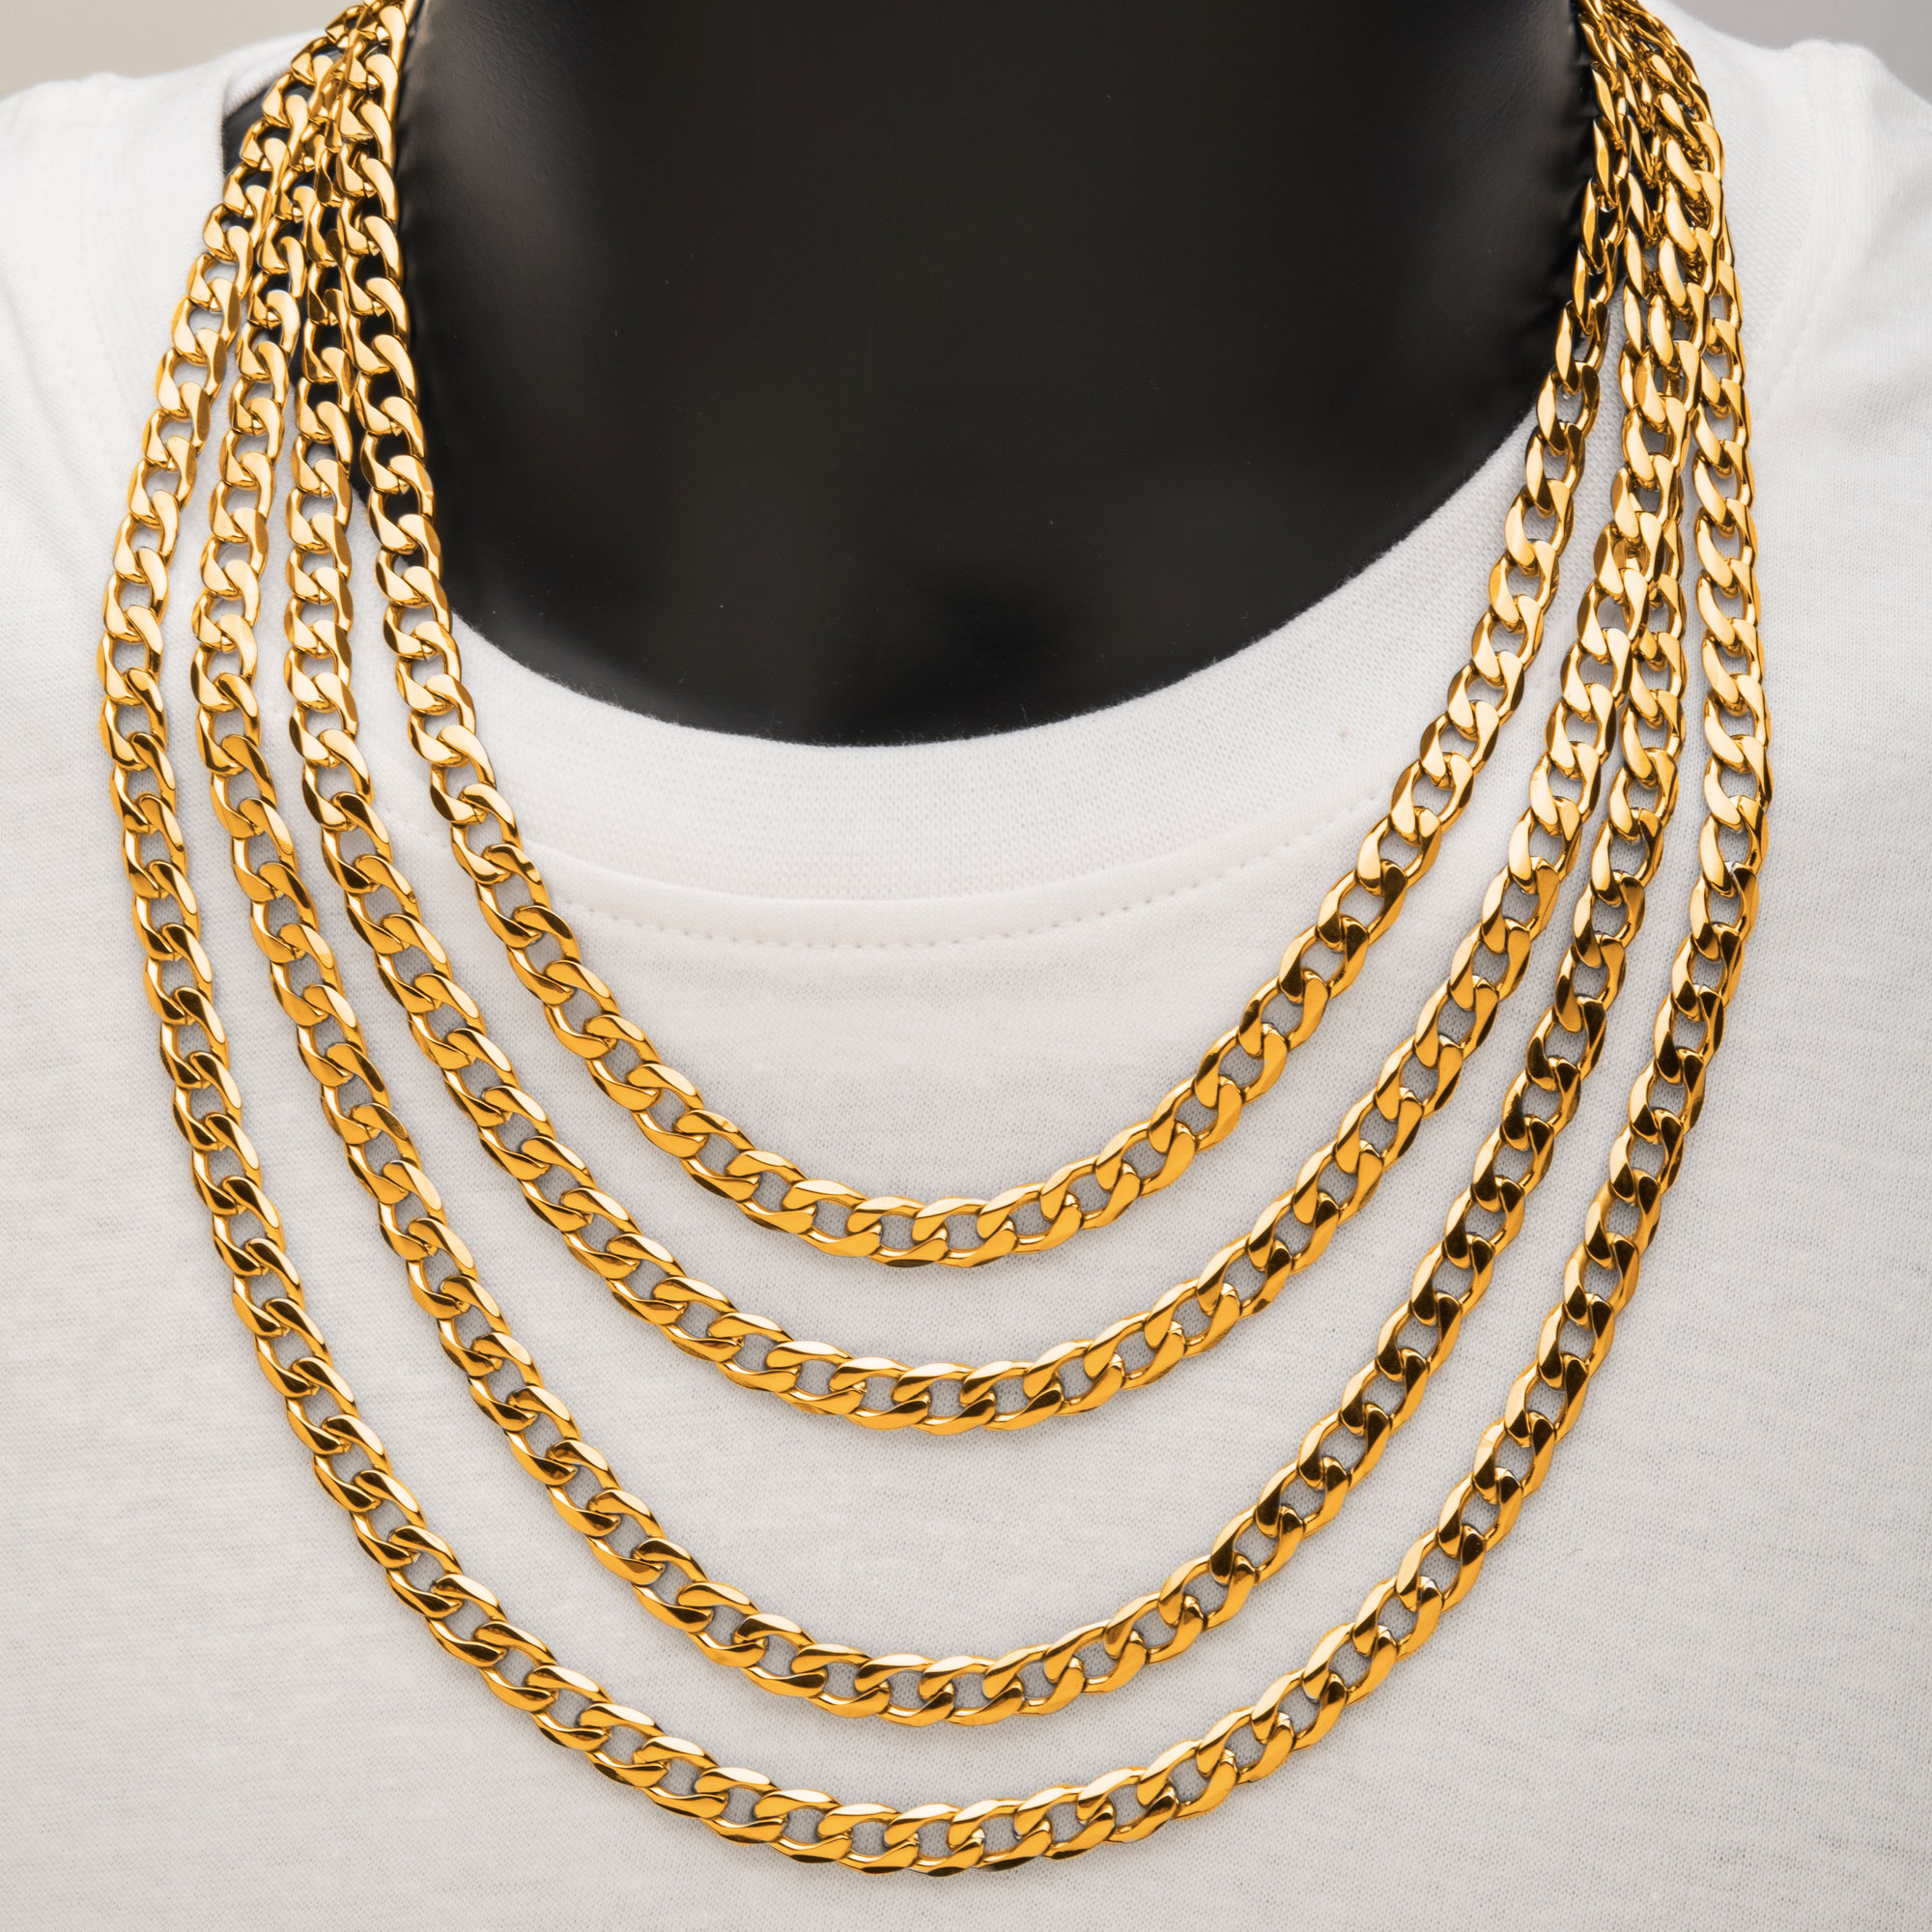 8mm 18K Gold Plated Bevel Curb Chain Image 2 Midtown Diamonds Reno, NV